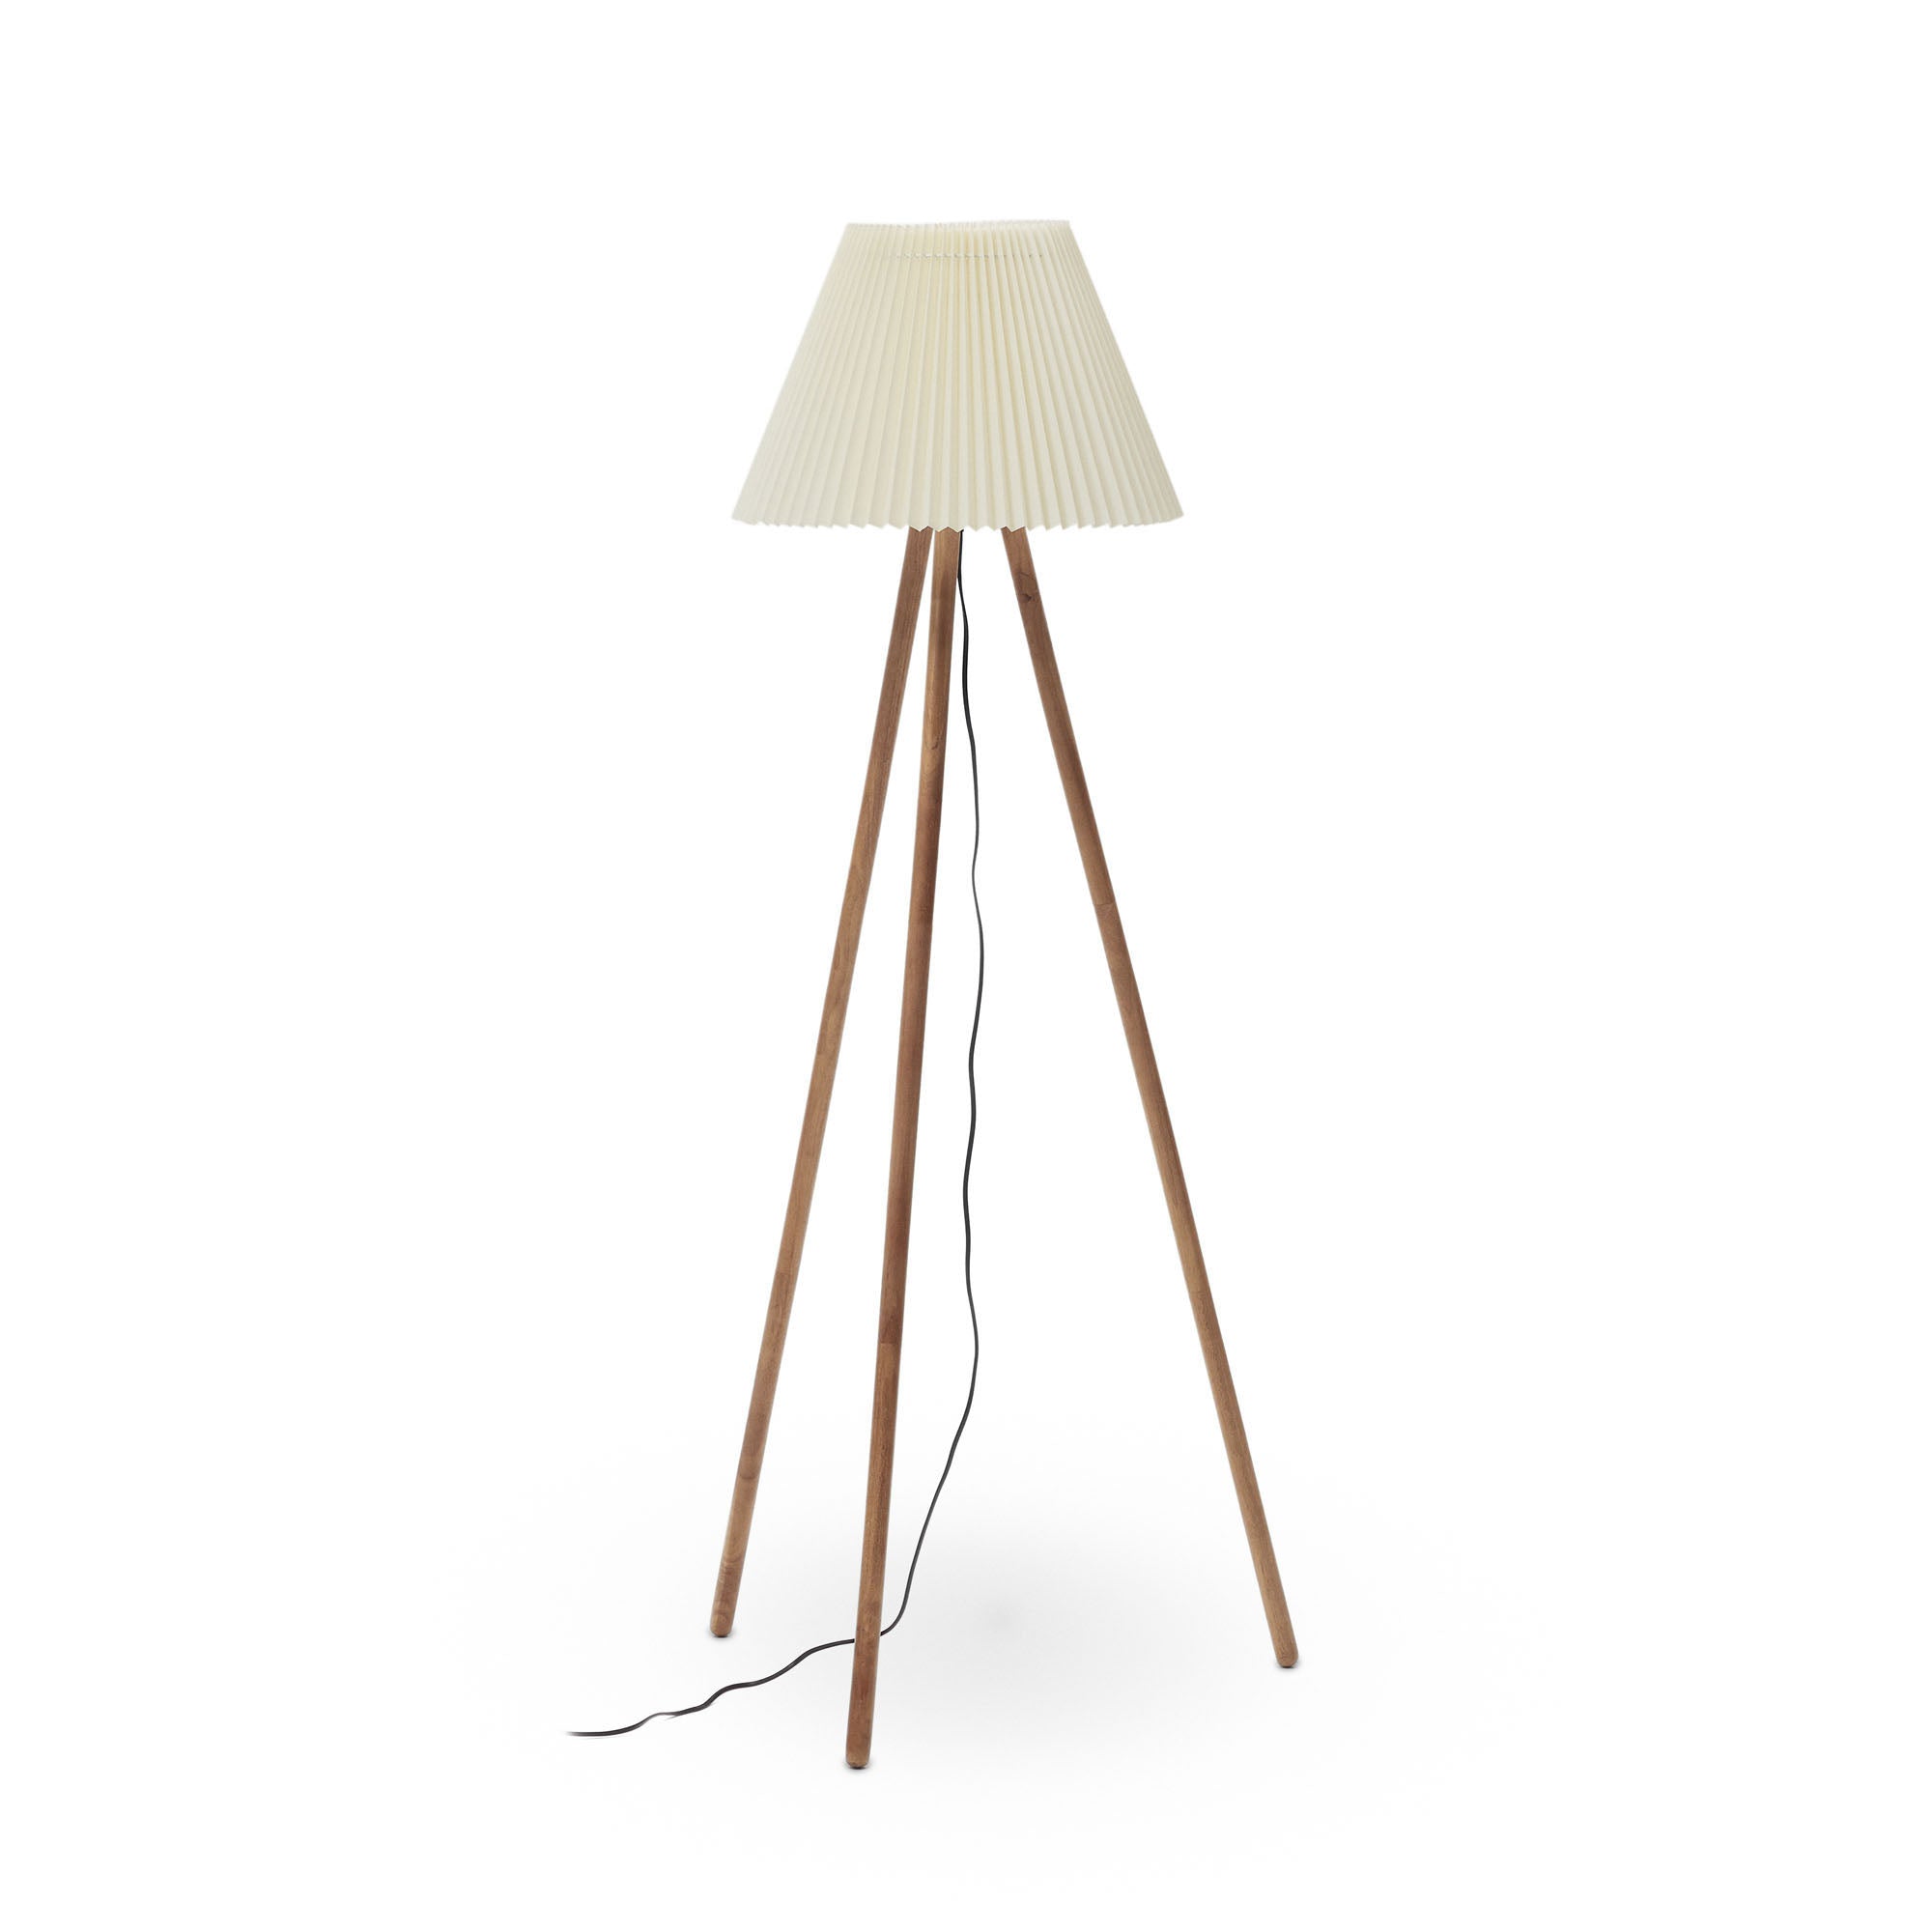 Benicarlo floor lamp in solid rubber wood with a natural, beige finish